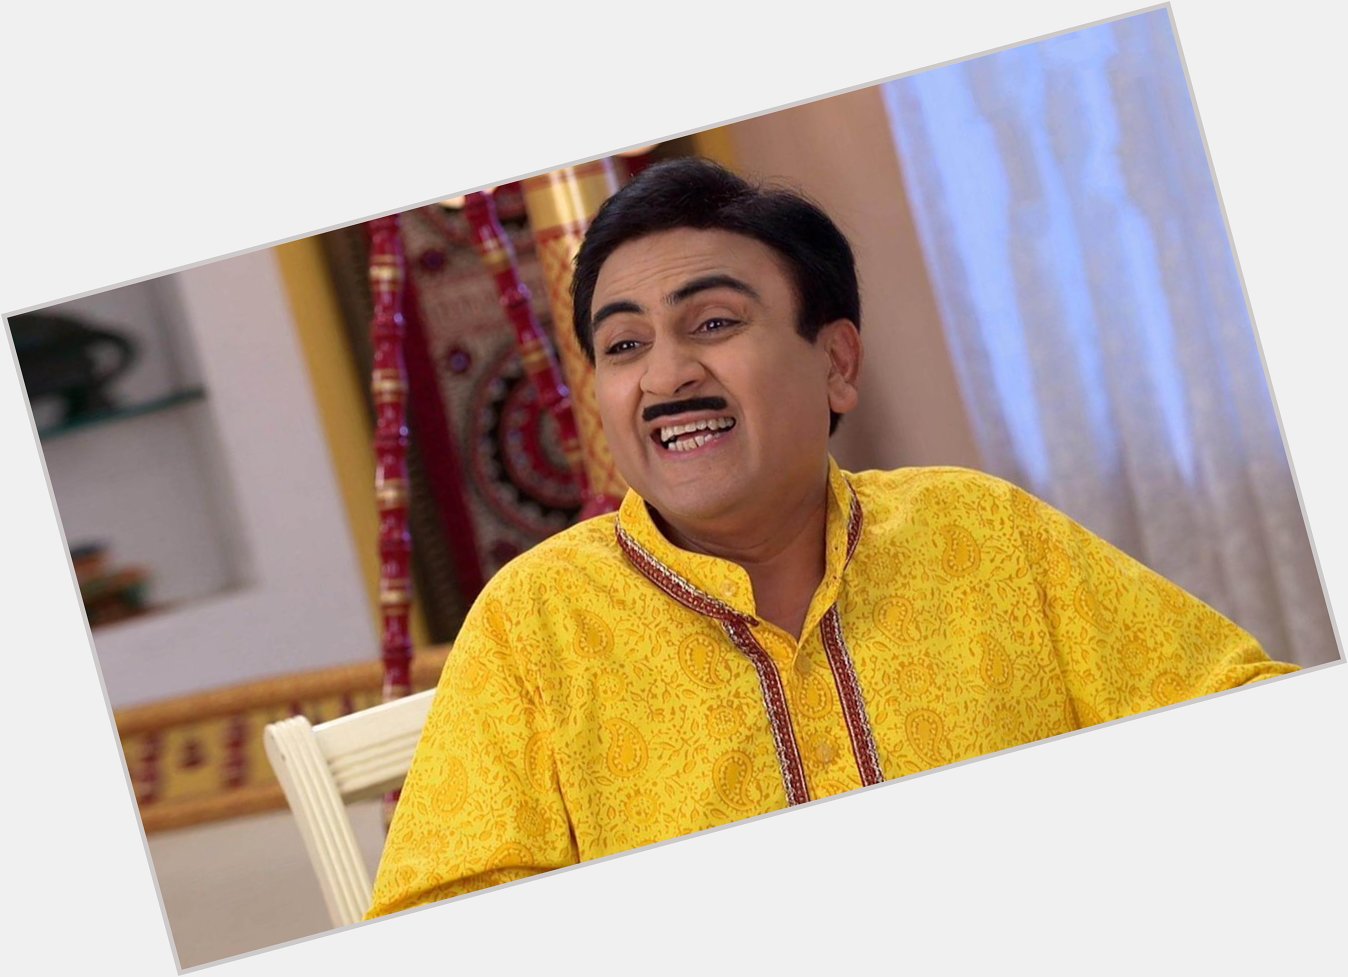 Happy Birthday Dilip Joshi sir 
Thanku for giving happiness in our life 